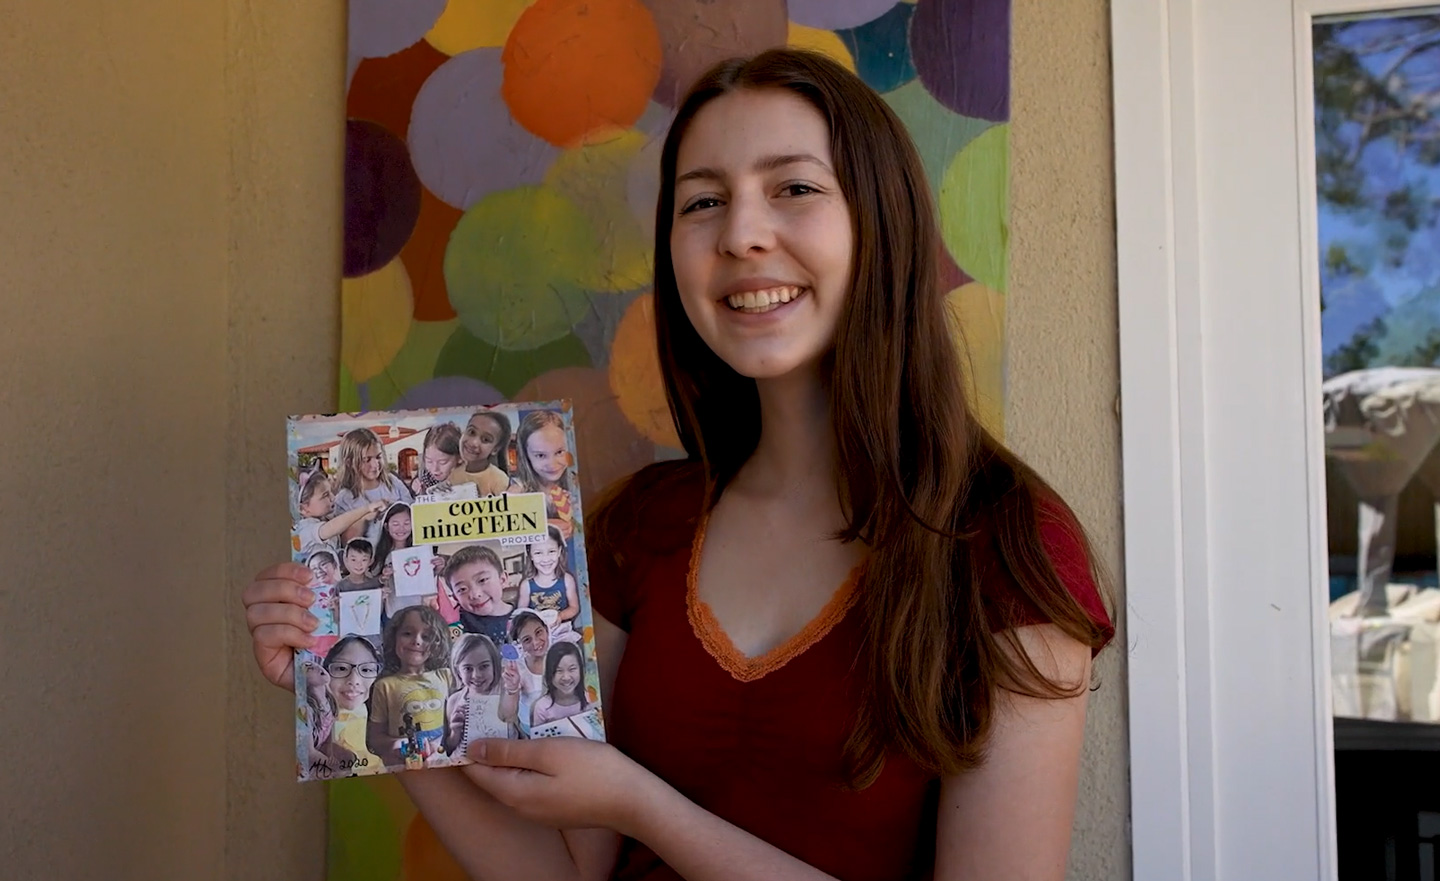 Sarah holding up a Covid nineTEEN collage of student photos.